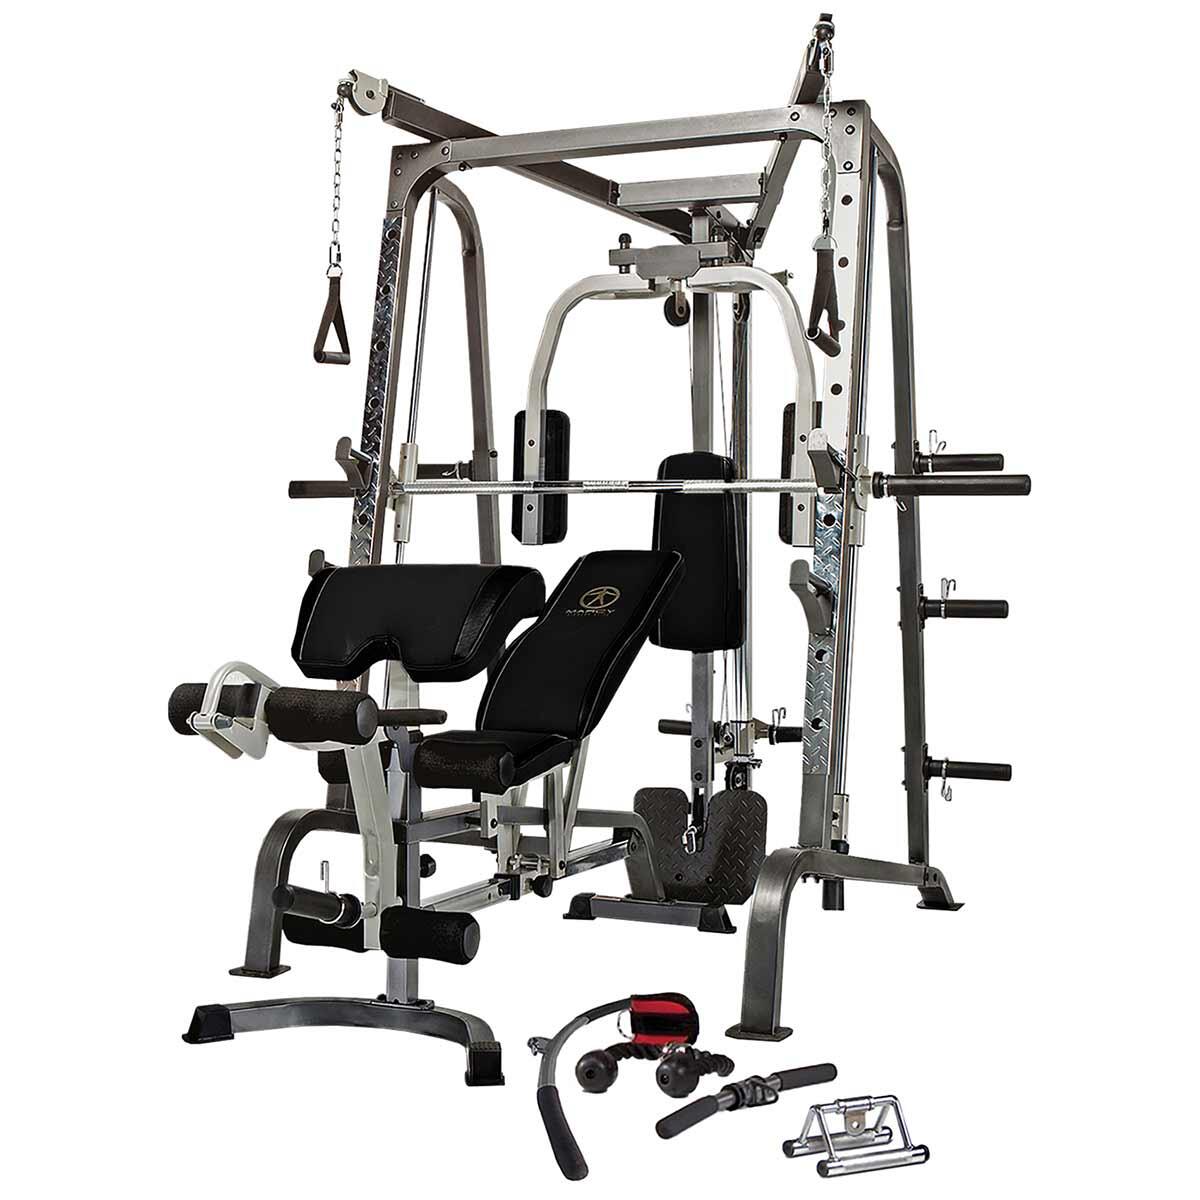 MARCY MD9010G DIAMOND ELITE DELUXE SMITH MACHINE WITH WEIGHT BENCH 1/8